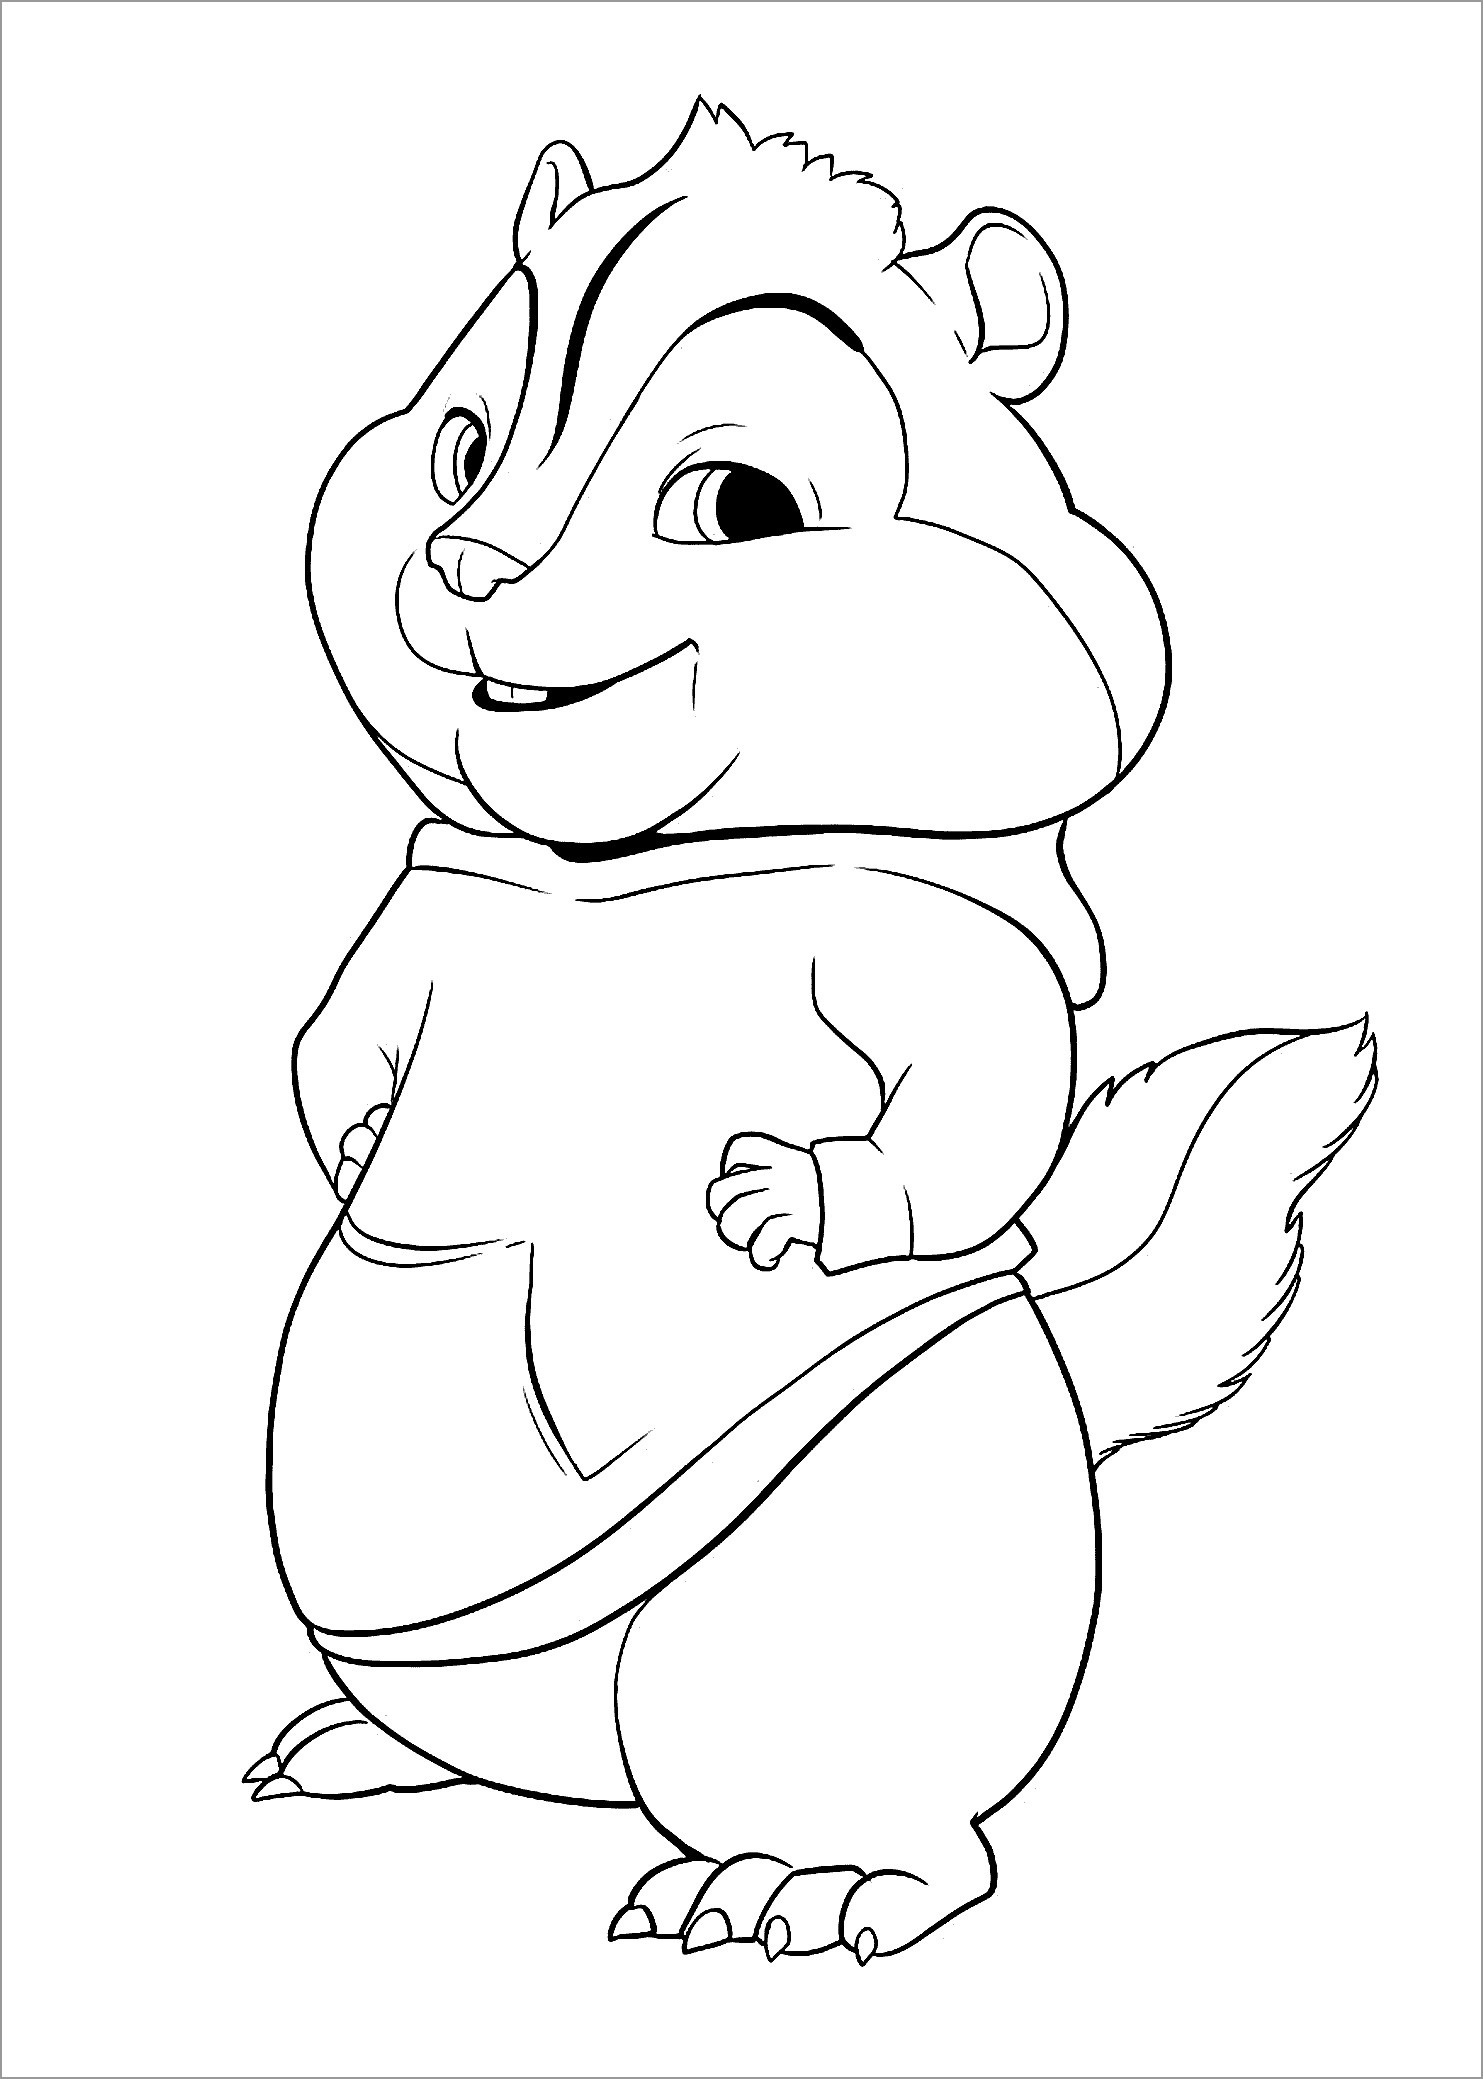 Theodore - Alvin and the Chipmunks Coloring Page